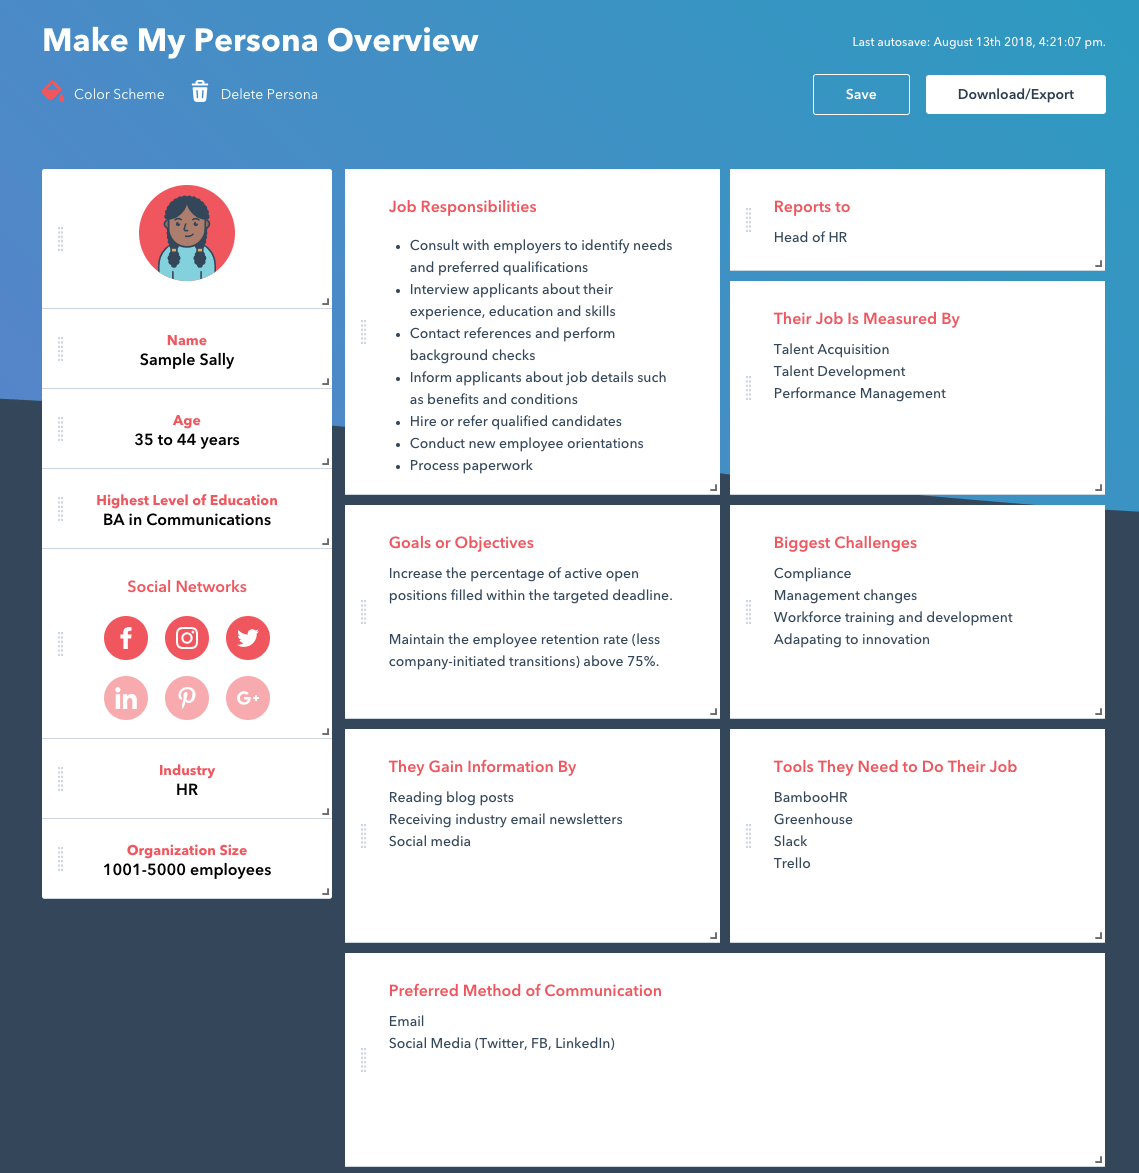 Make My Persona Overview by HubSpot